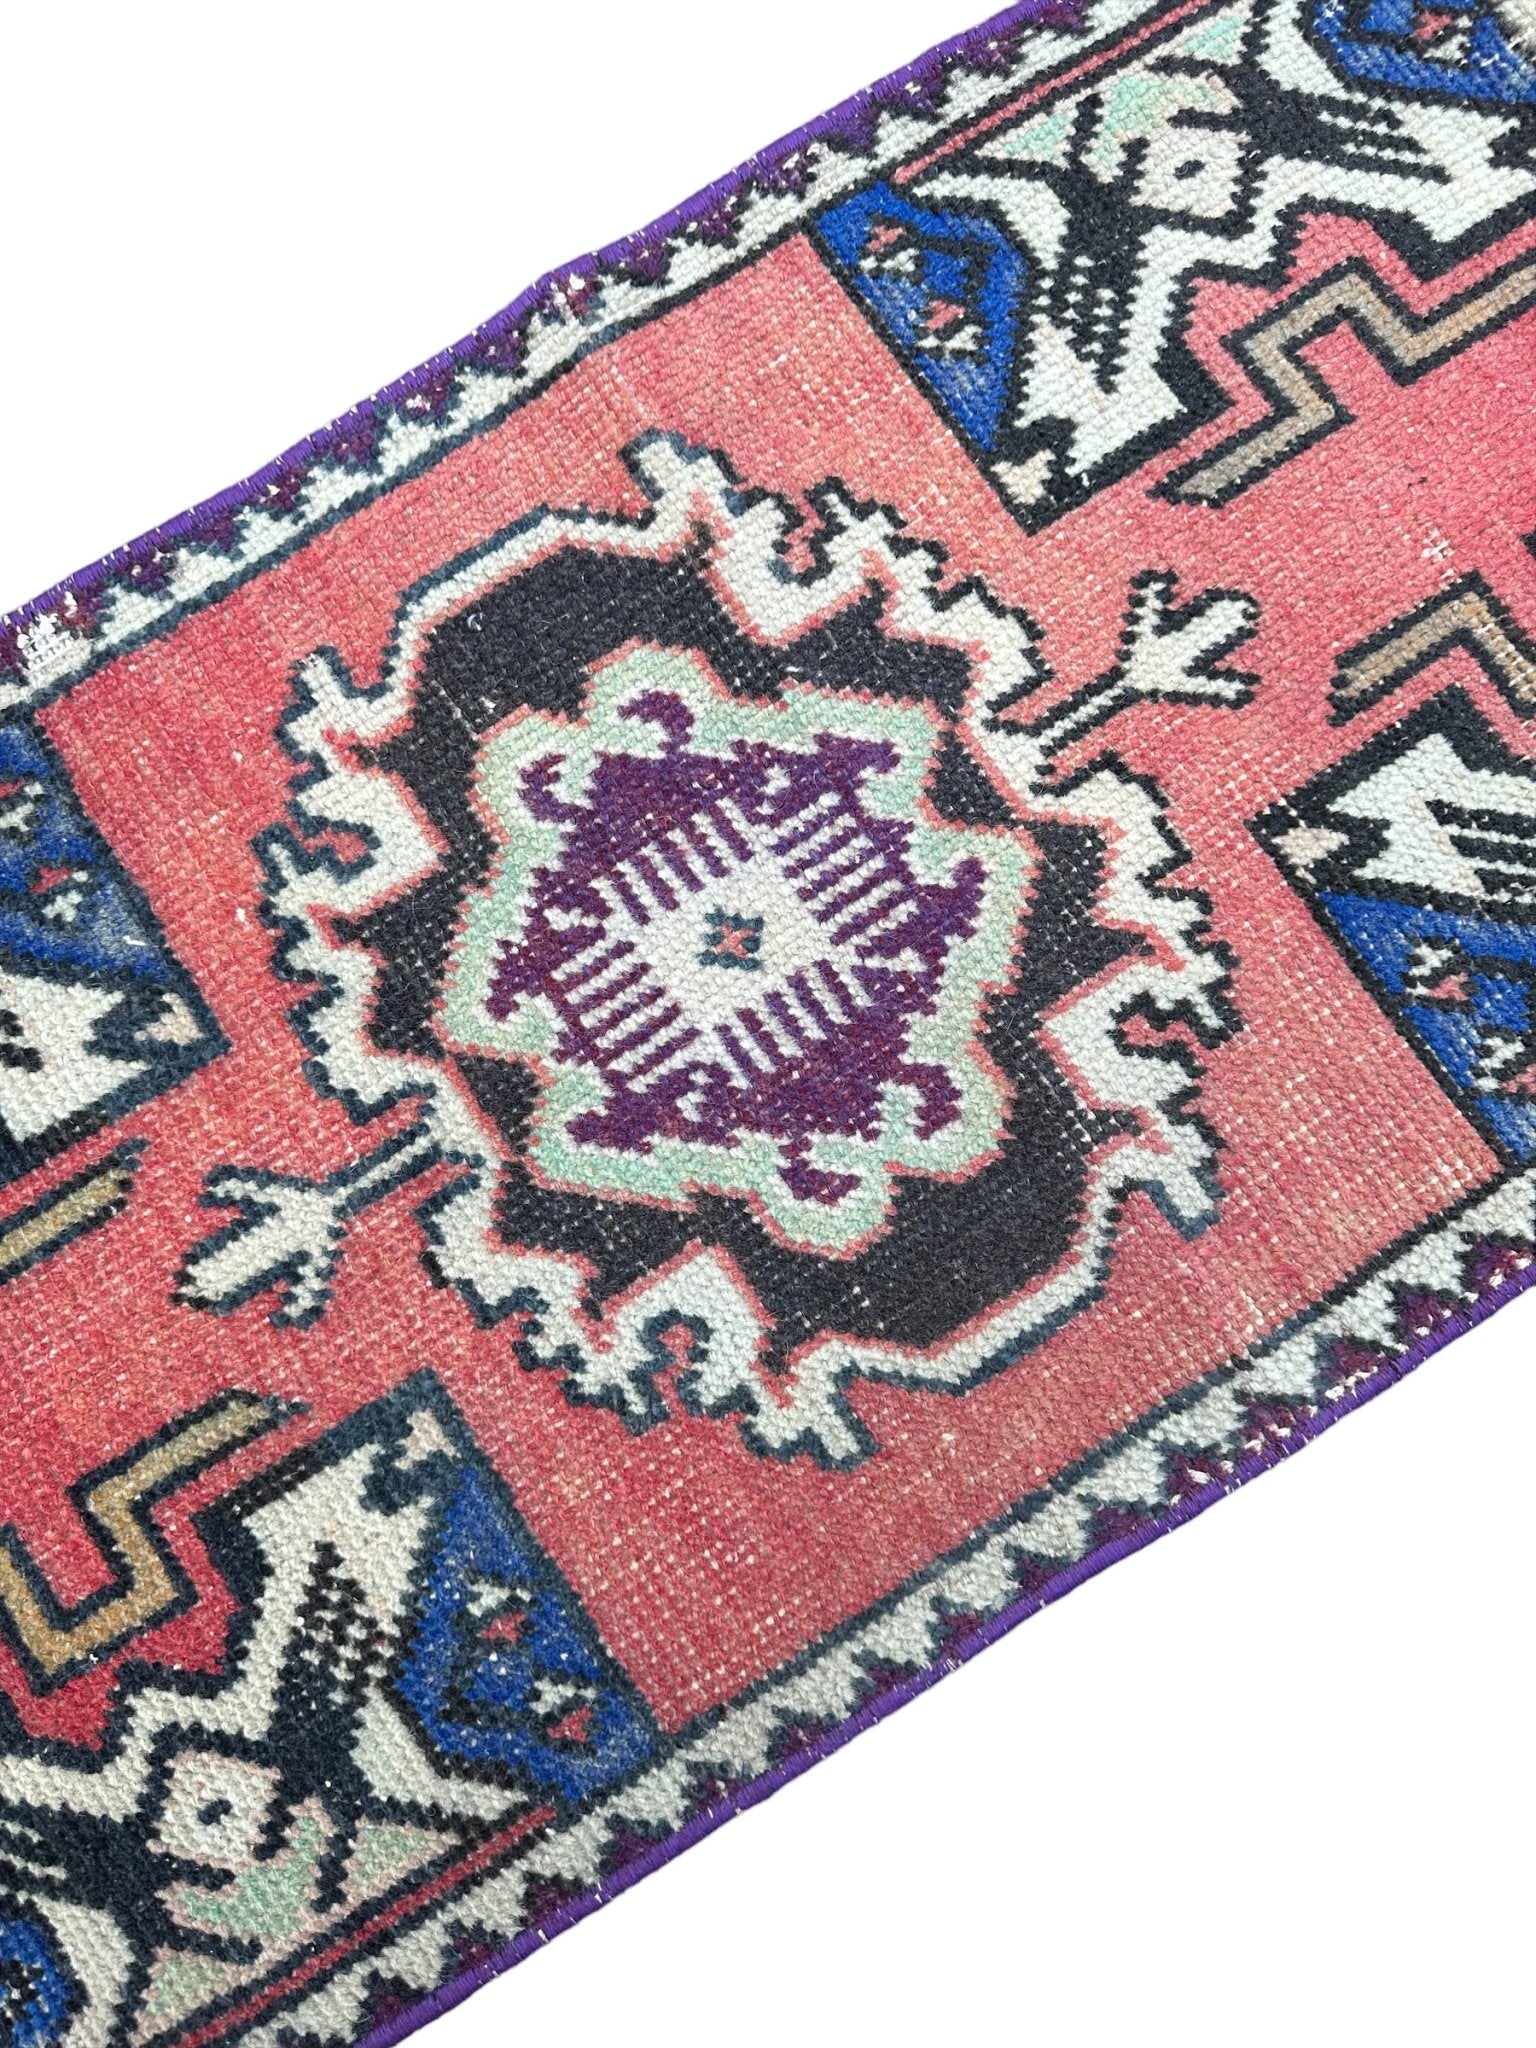 Turkish Mini Rug # 2844 | 1' 6'' x 2' 11'' - Krazy For Rugs